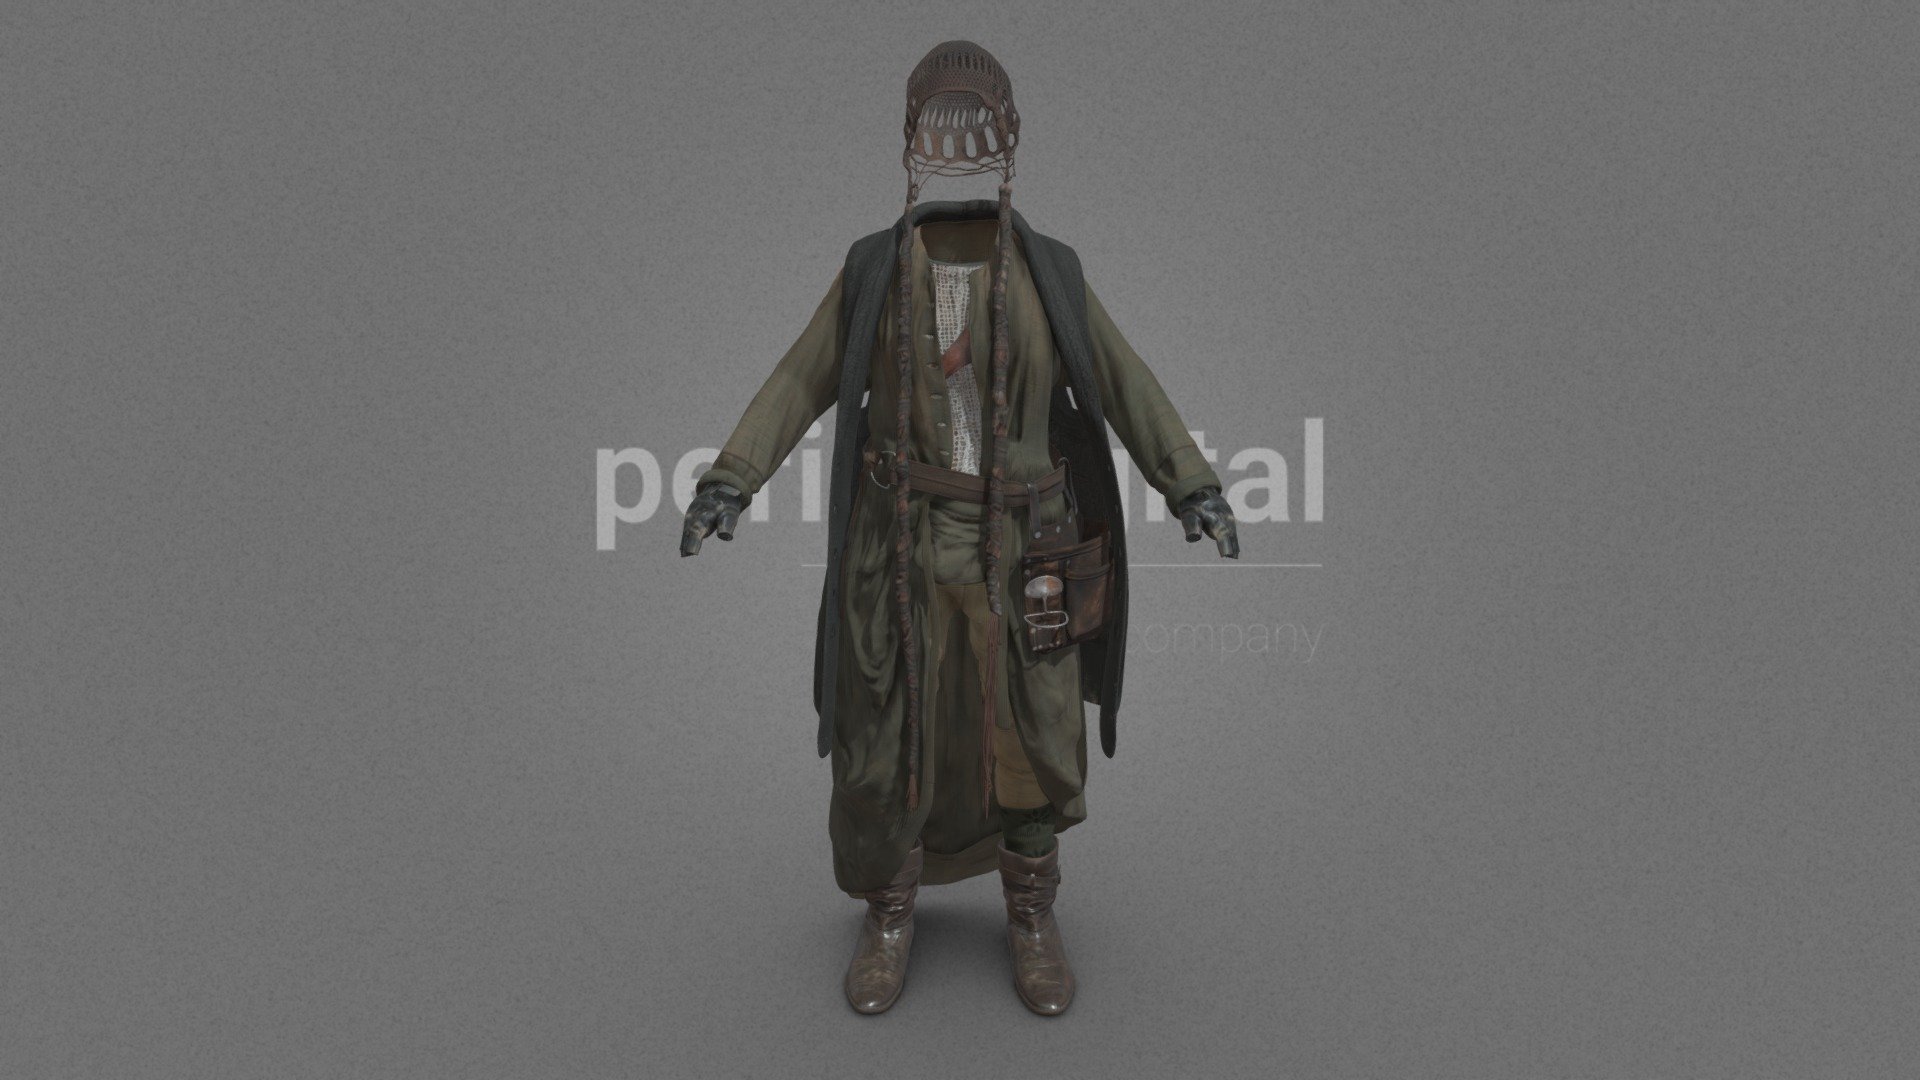 Brown knitted hat with long strings, long grey knitted vest with buttons, grey dress with buttons and laces; brown leather breastplate, white T-shirt, brown leather fanny pack, beige tight pants with laces and side pockets; green socks, brown leather boots, dark brown leather gloves.




They are optimized for use in 3D scenes of high polygonalization and optimized for rendering.

We do not include characters, but they are positioned for you to include and adjust your own character.

They have a model LOW (_LODRIG) inside the Blender file (included in the AdditionalFiles), which you can use for vertex weighting or cloth simulation and thus, make the transfer of vertices or property masks from the LOW to the HIGH** model.

We have included the texture maps in high resolution, as well as the Displacement maps, so you can make extreme point of view with your 3D cameras, as well as the Blender file so you can edit any aspect of the set. 

Enjoy it.

Web: https://peris.digital/ - Wasteland Series - Model 13 - Buy Royalty Free 3D model by Peris Digital (@perisdigital) 3d model